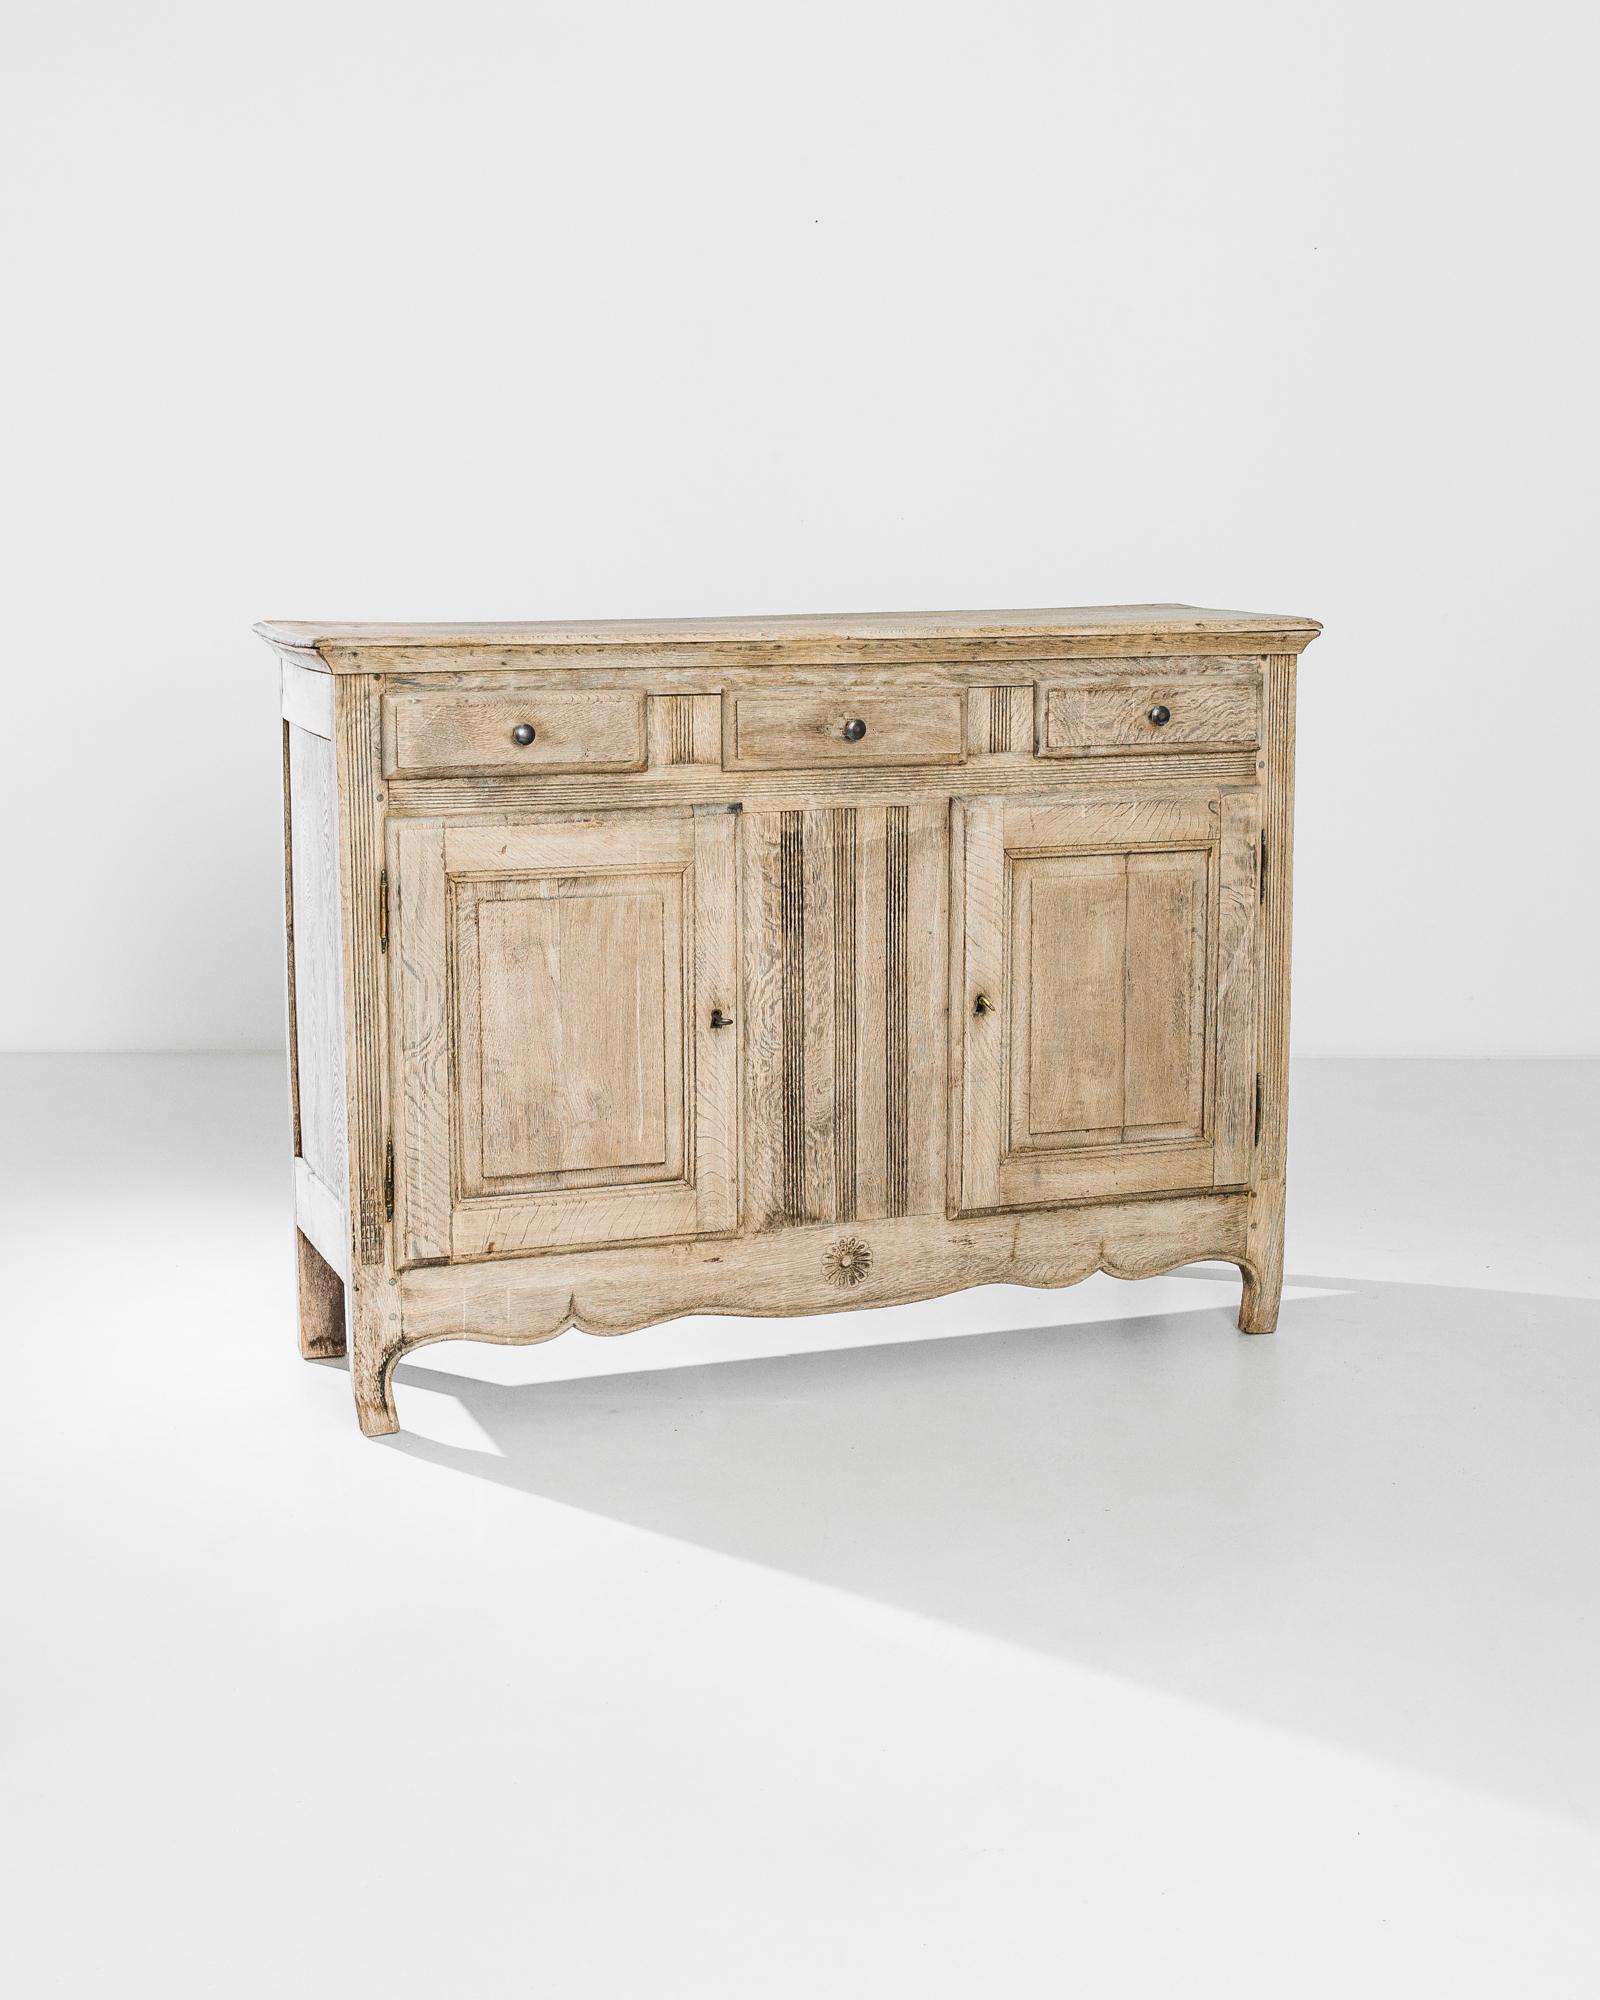 Lively decorative accents give this antique oak buffet a refined charm. Made in France in the 1840s, the panels of the upright case are caved with fluted detail and mermaid scales; a carved rosette hangs in the curves of the scalloped apron. The oak